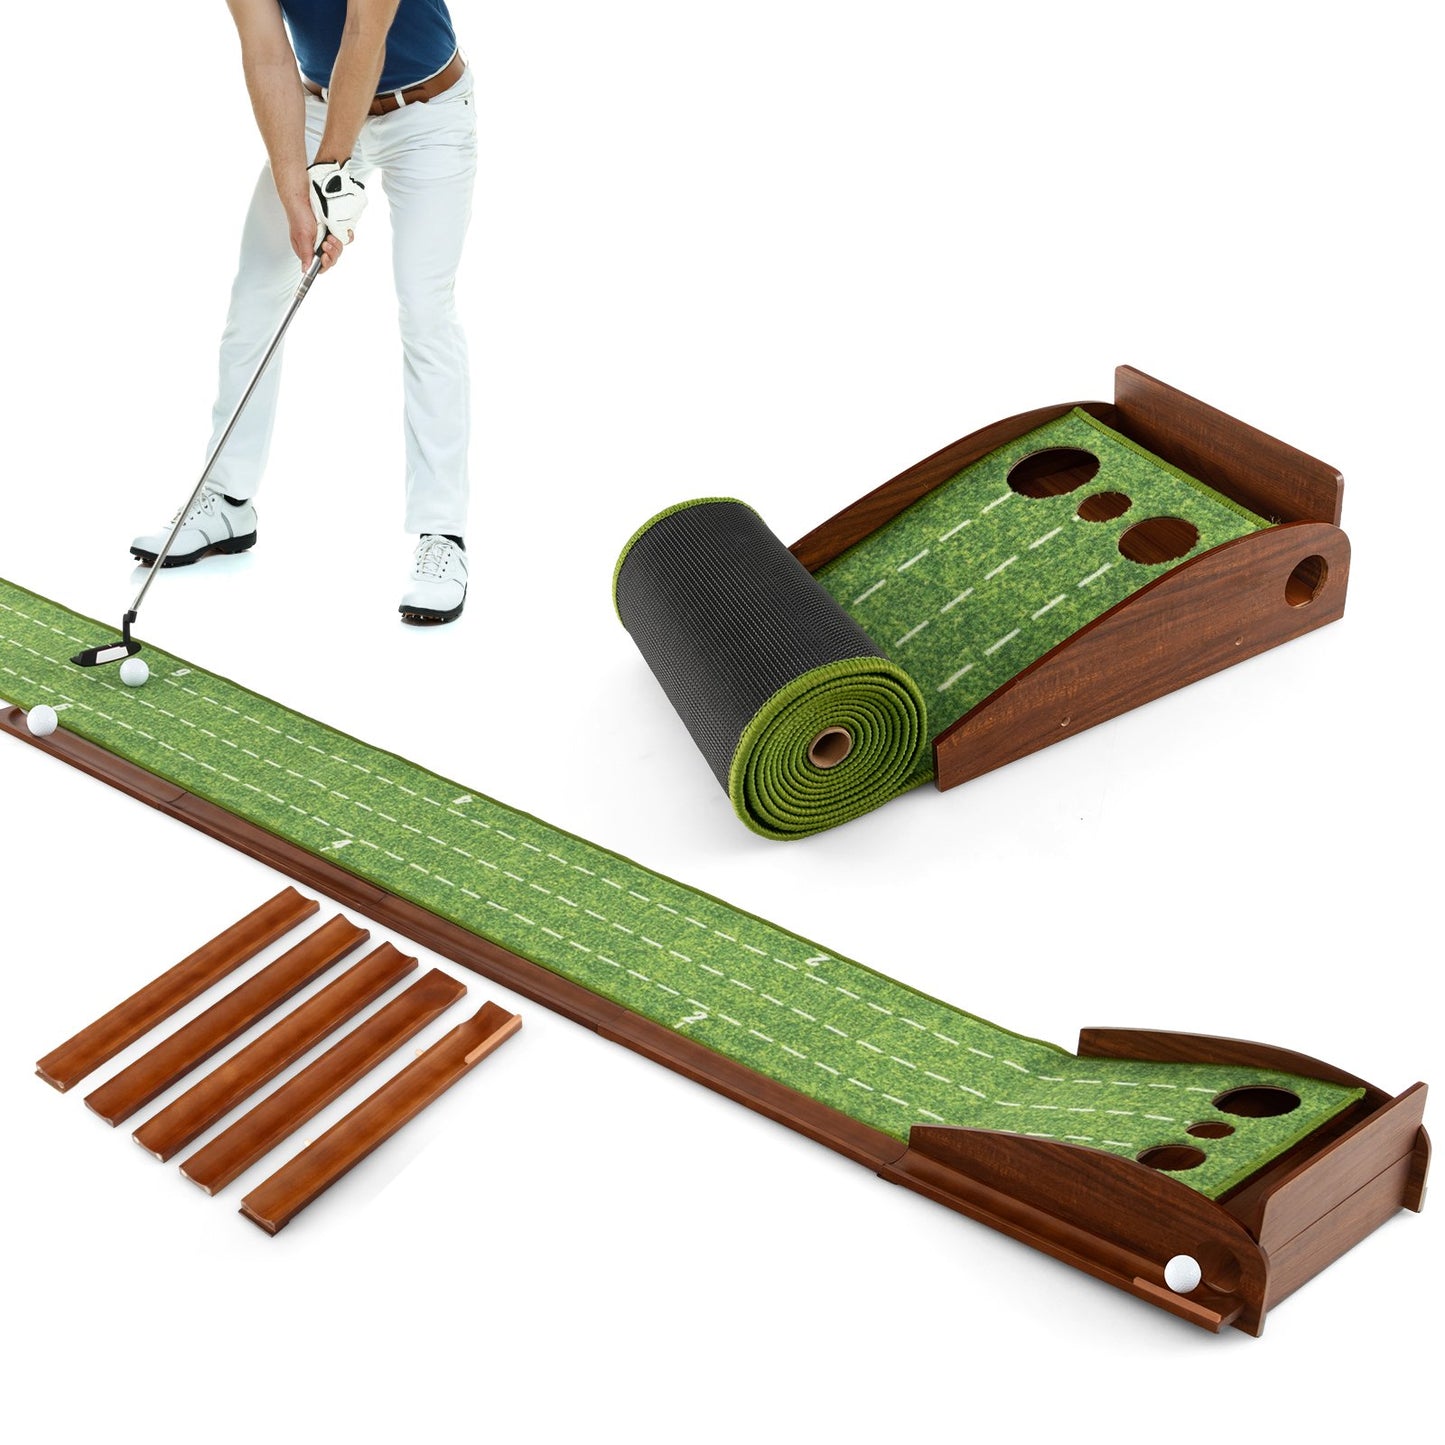 Golf Putting Mat Practice Training Aid with Auto Ball Return and 3 Hole Sizes, Green